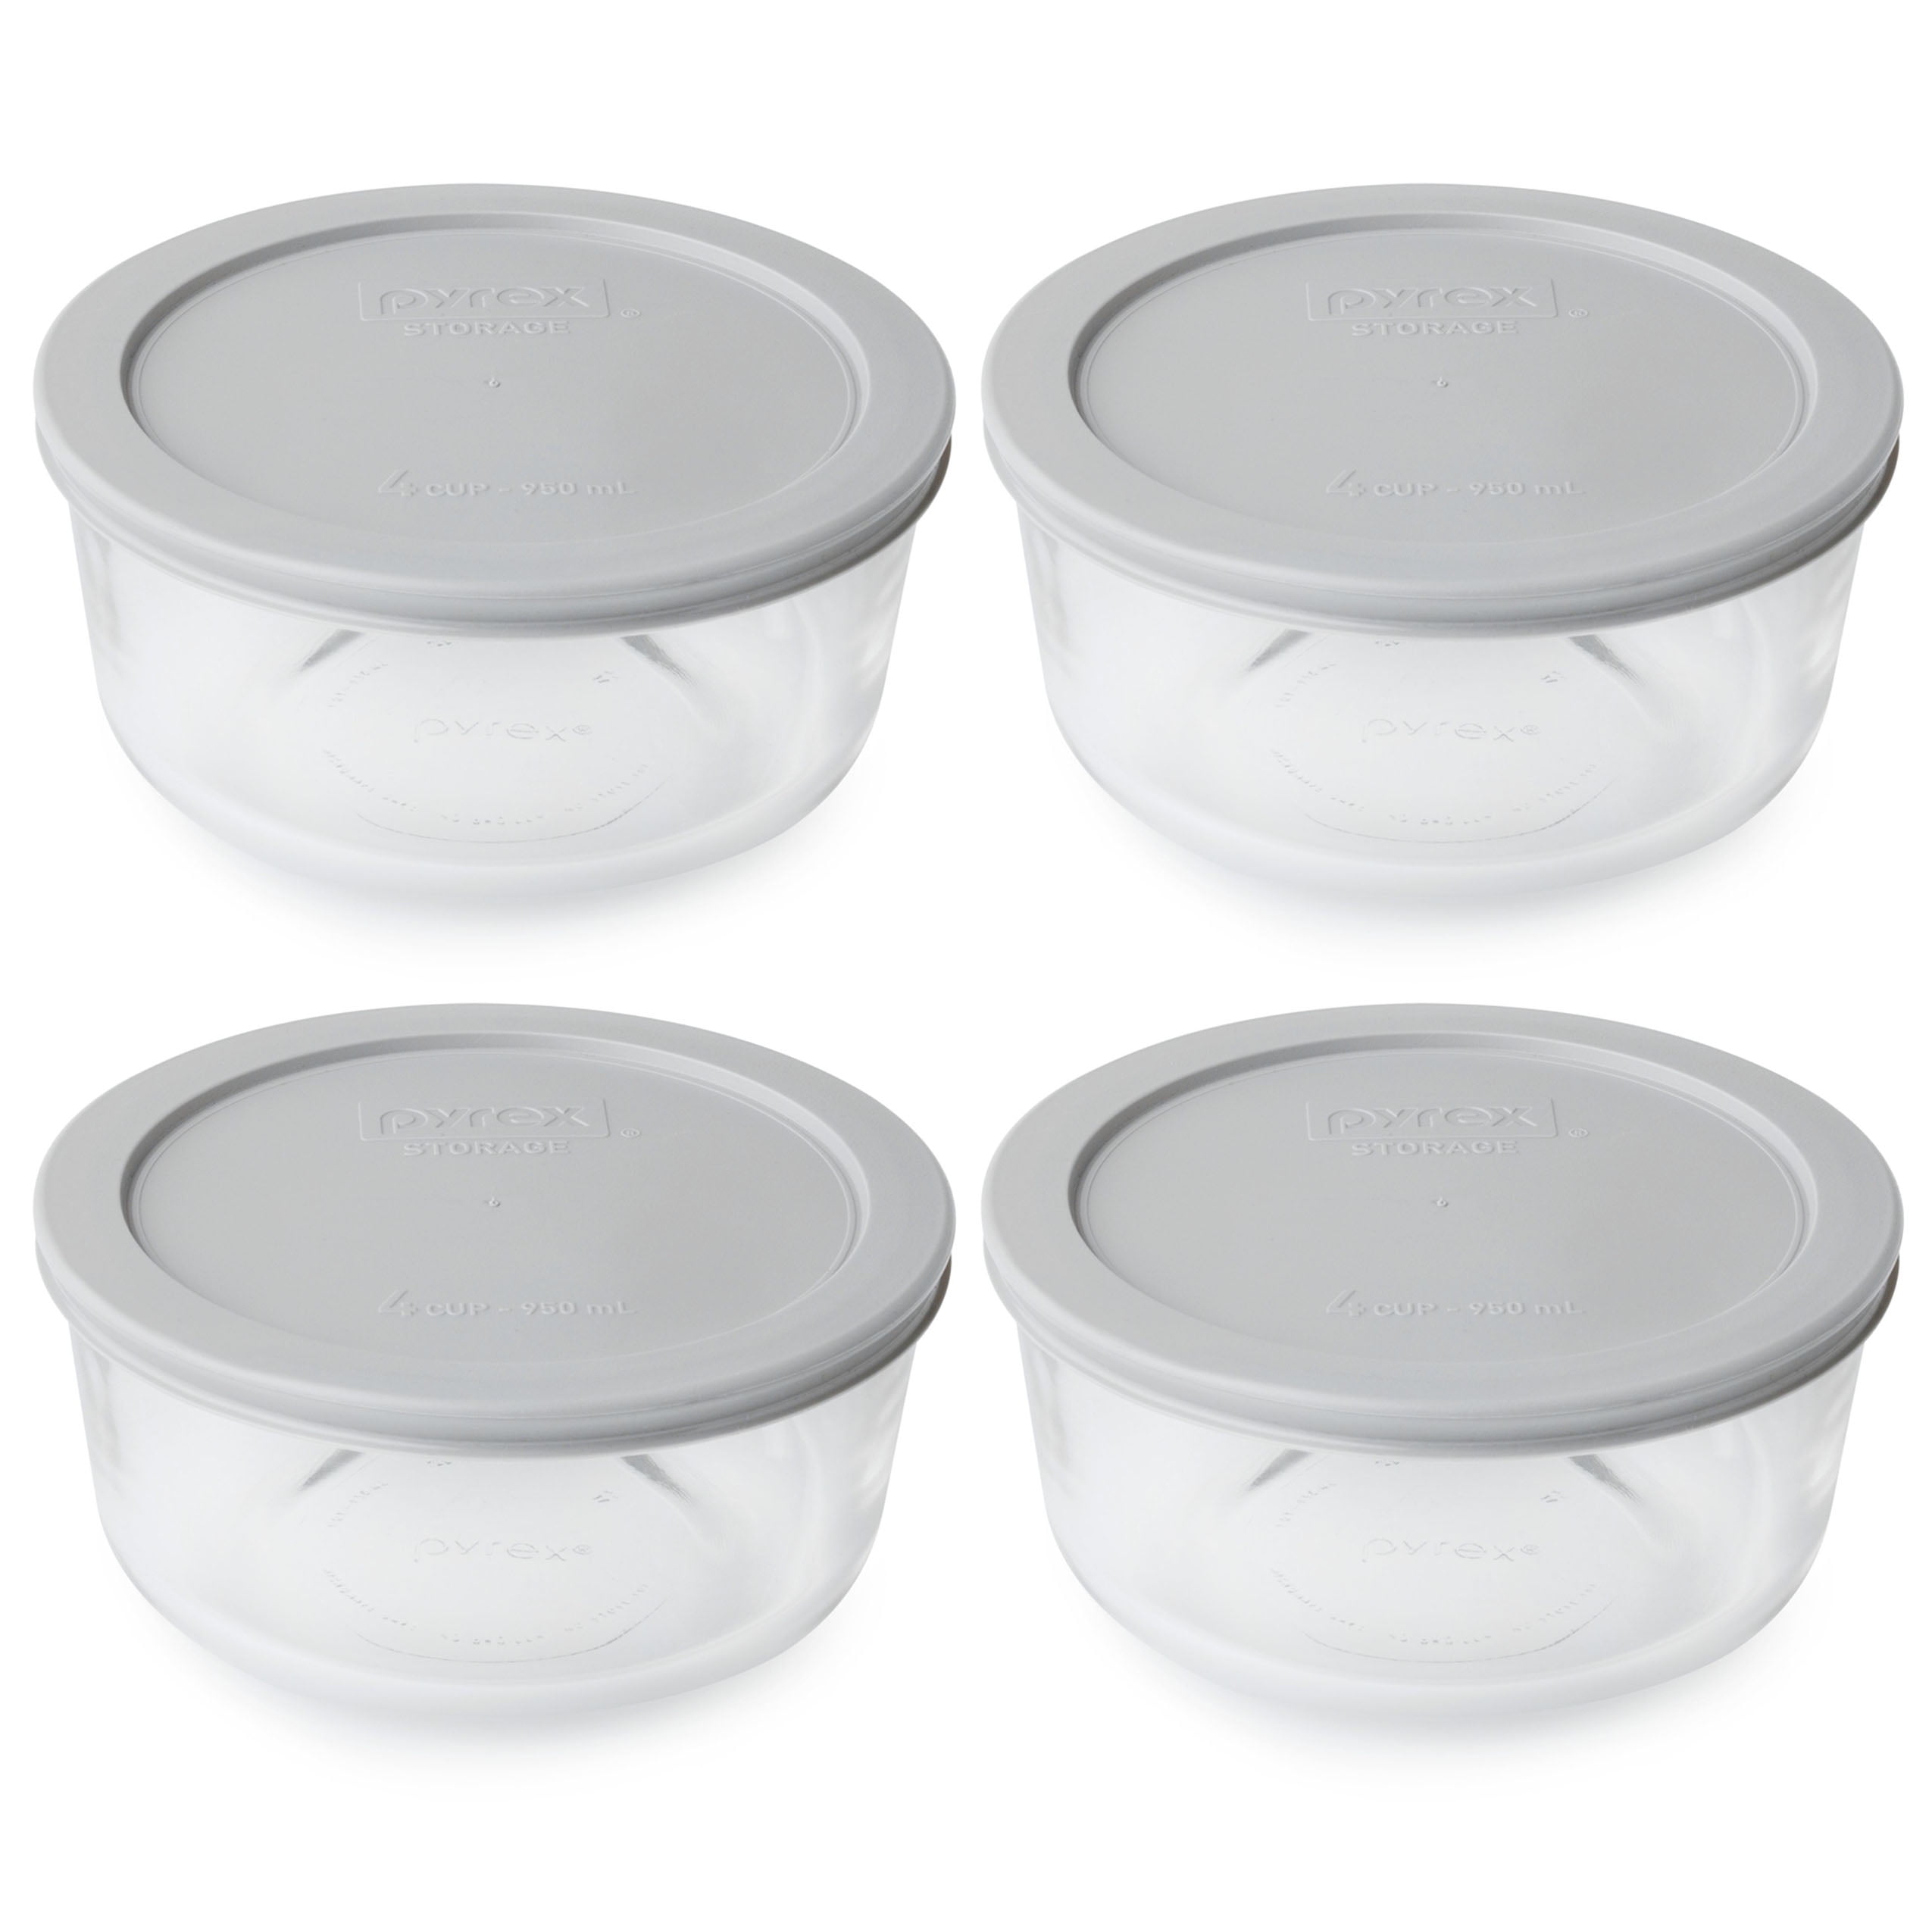 2 Pack Pyrex 7201-PC Round White 4 Cup Storage Lid for Glass Bowls 